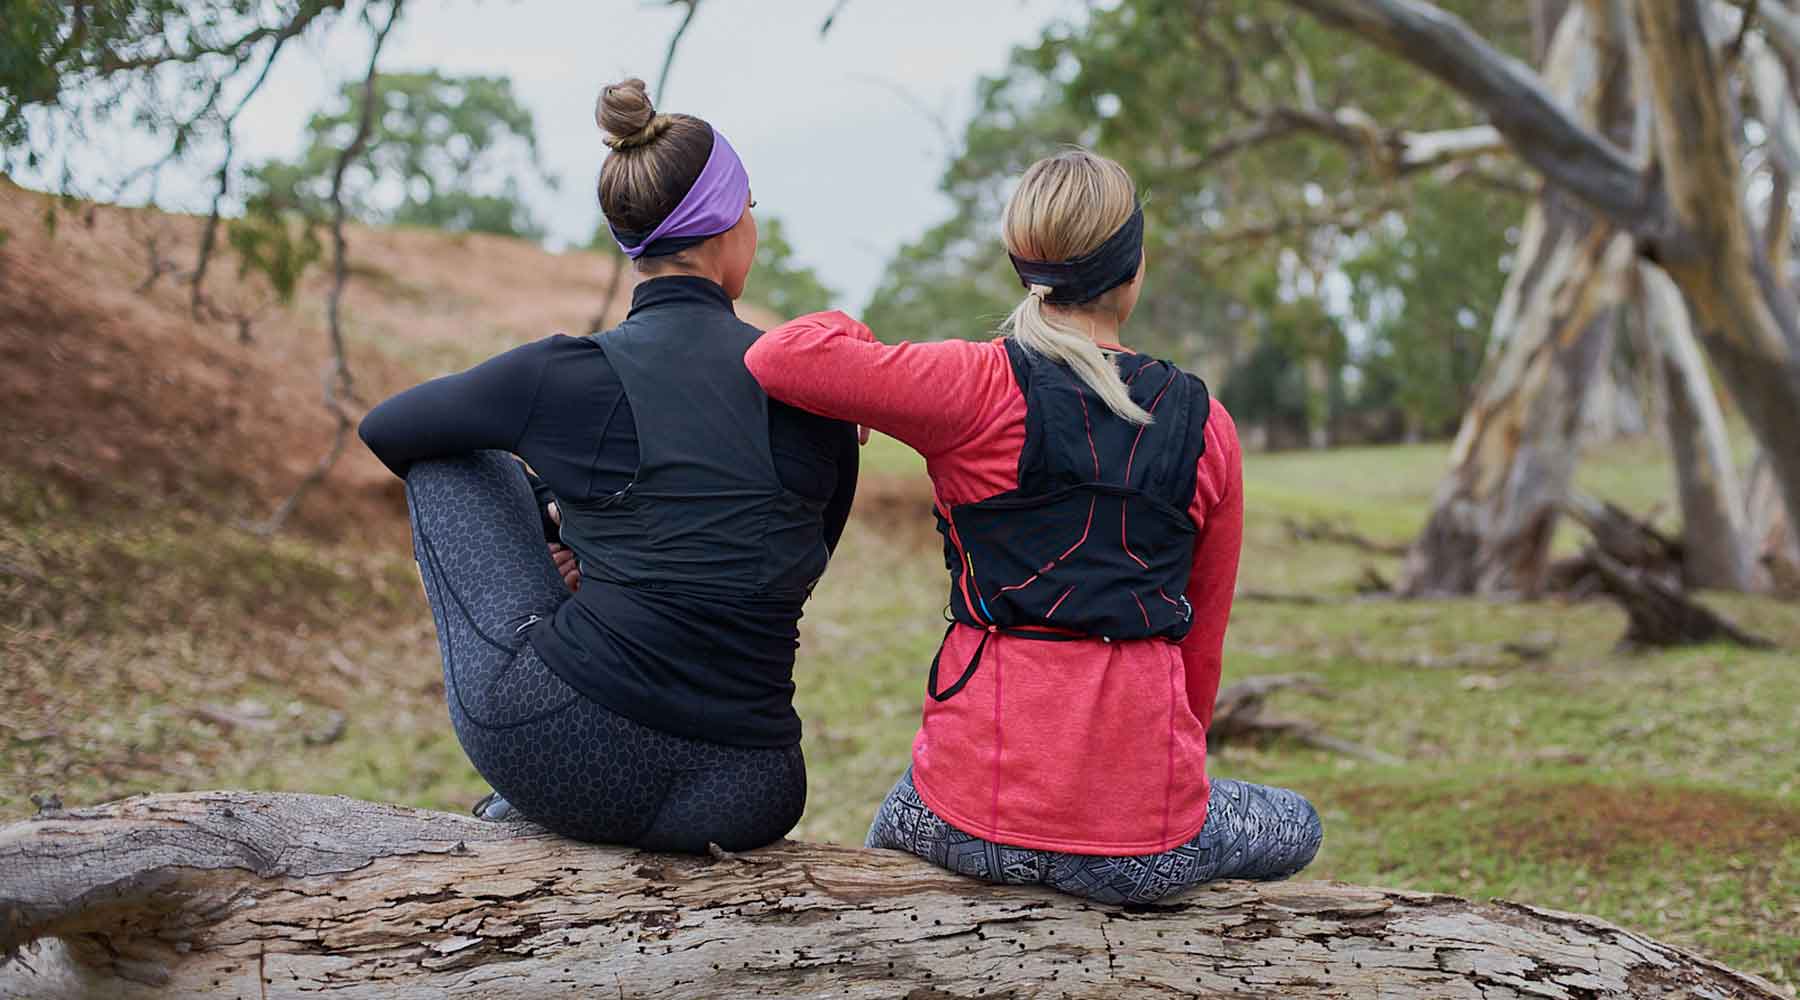 Two women resting on a log with running vests on wearing a purple sweatband and a black headband